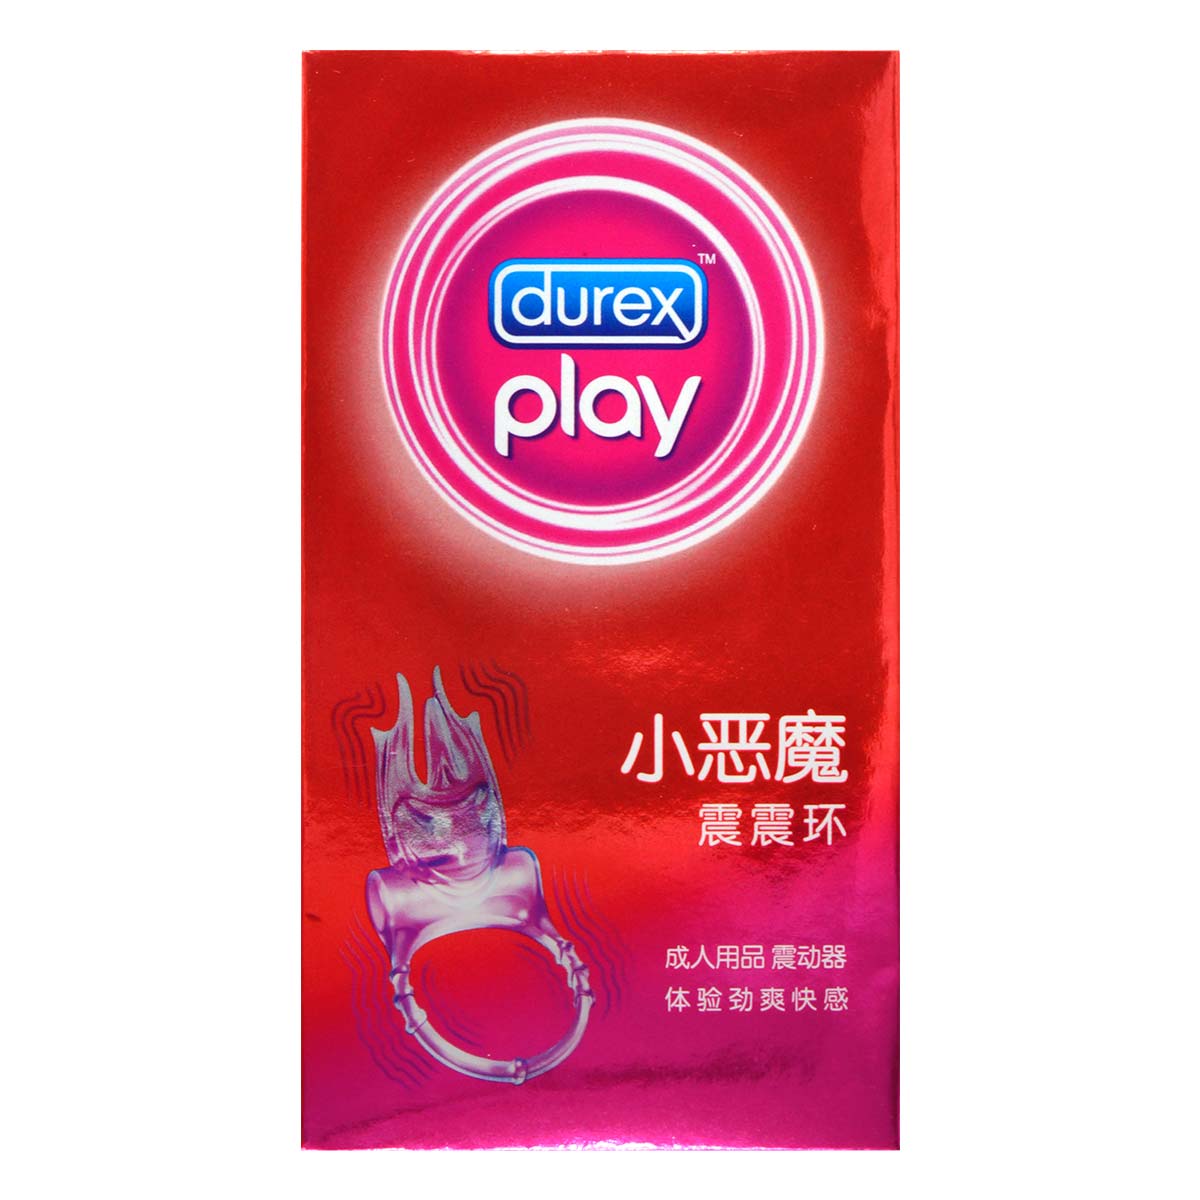 Durex Play O-Ring of Bliss-p_2